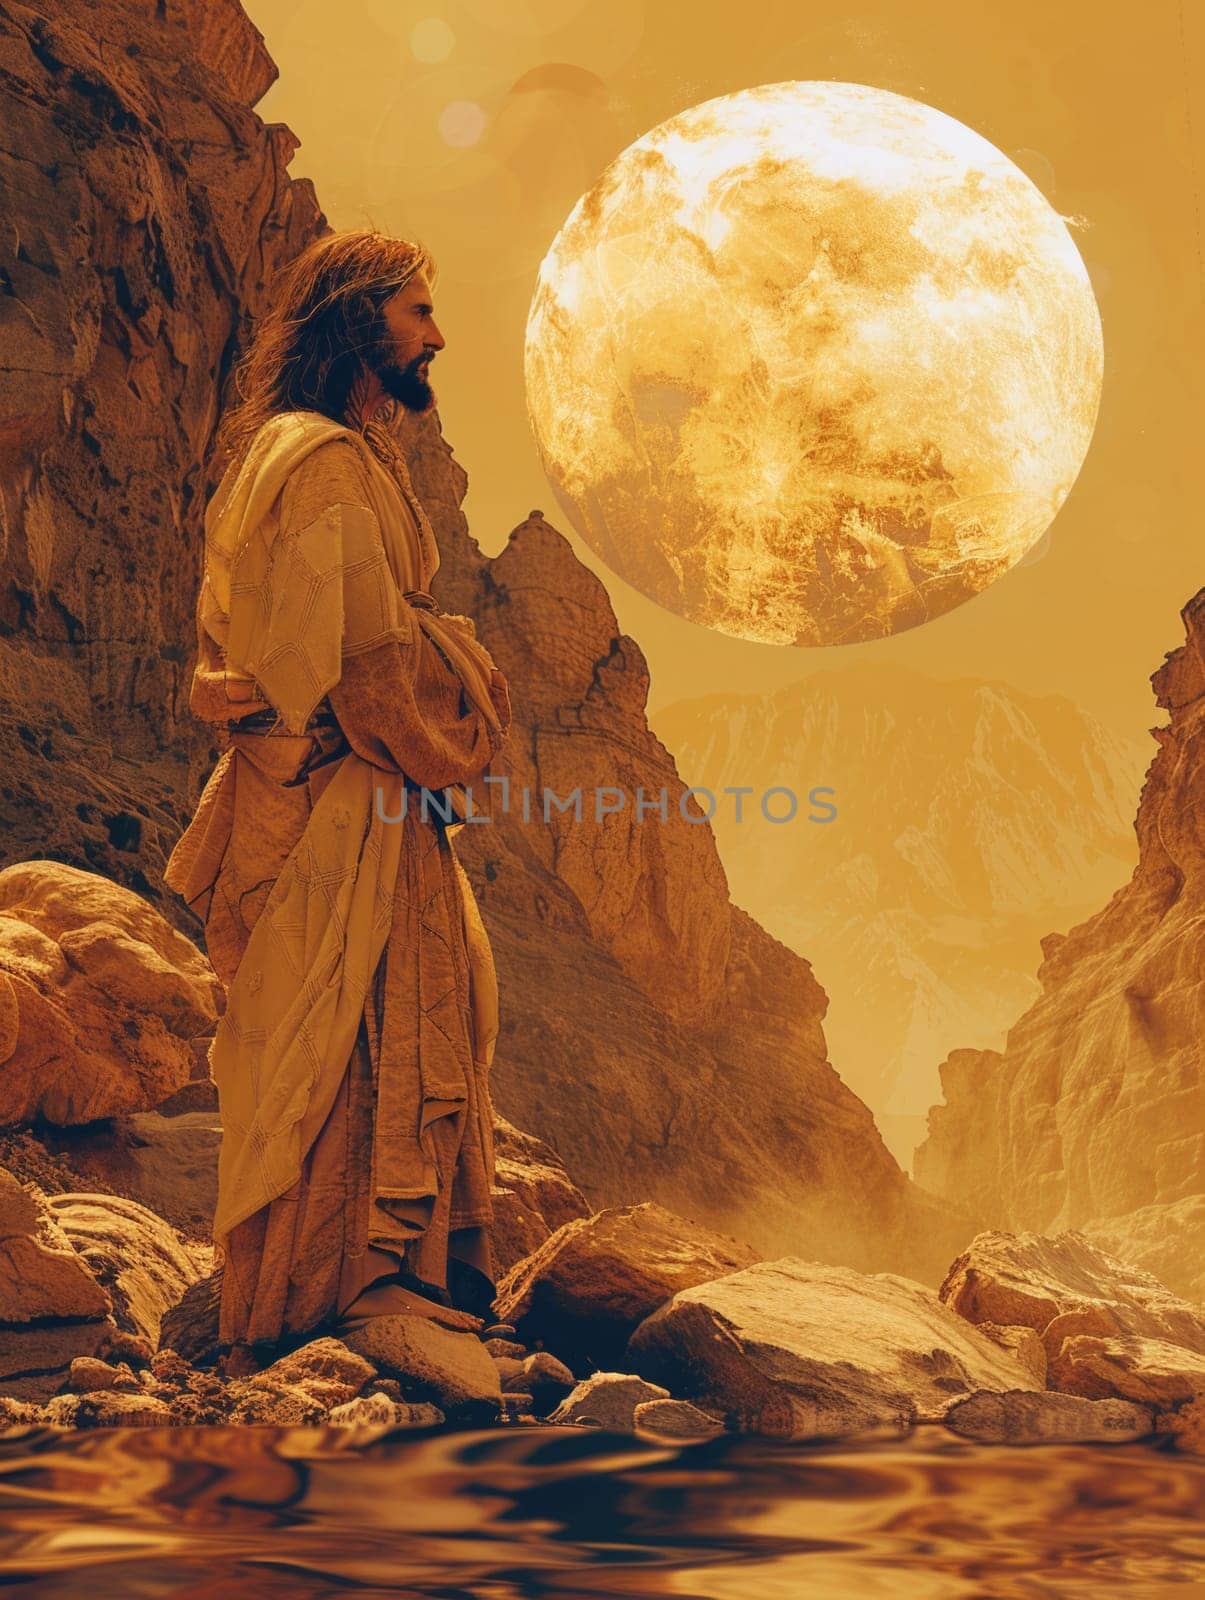 A man is standing on rocks in front of a full moon in this painting.